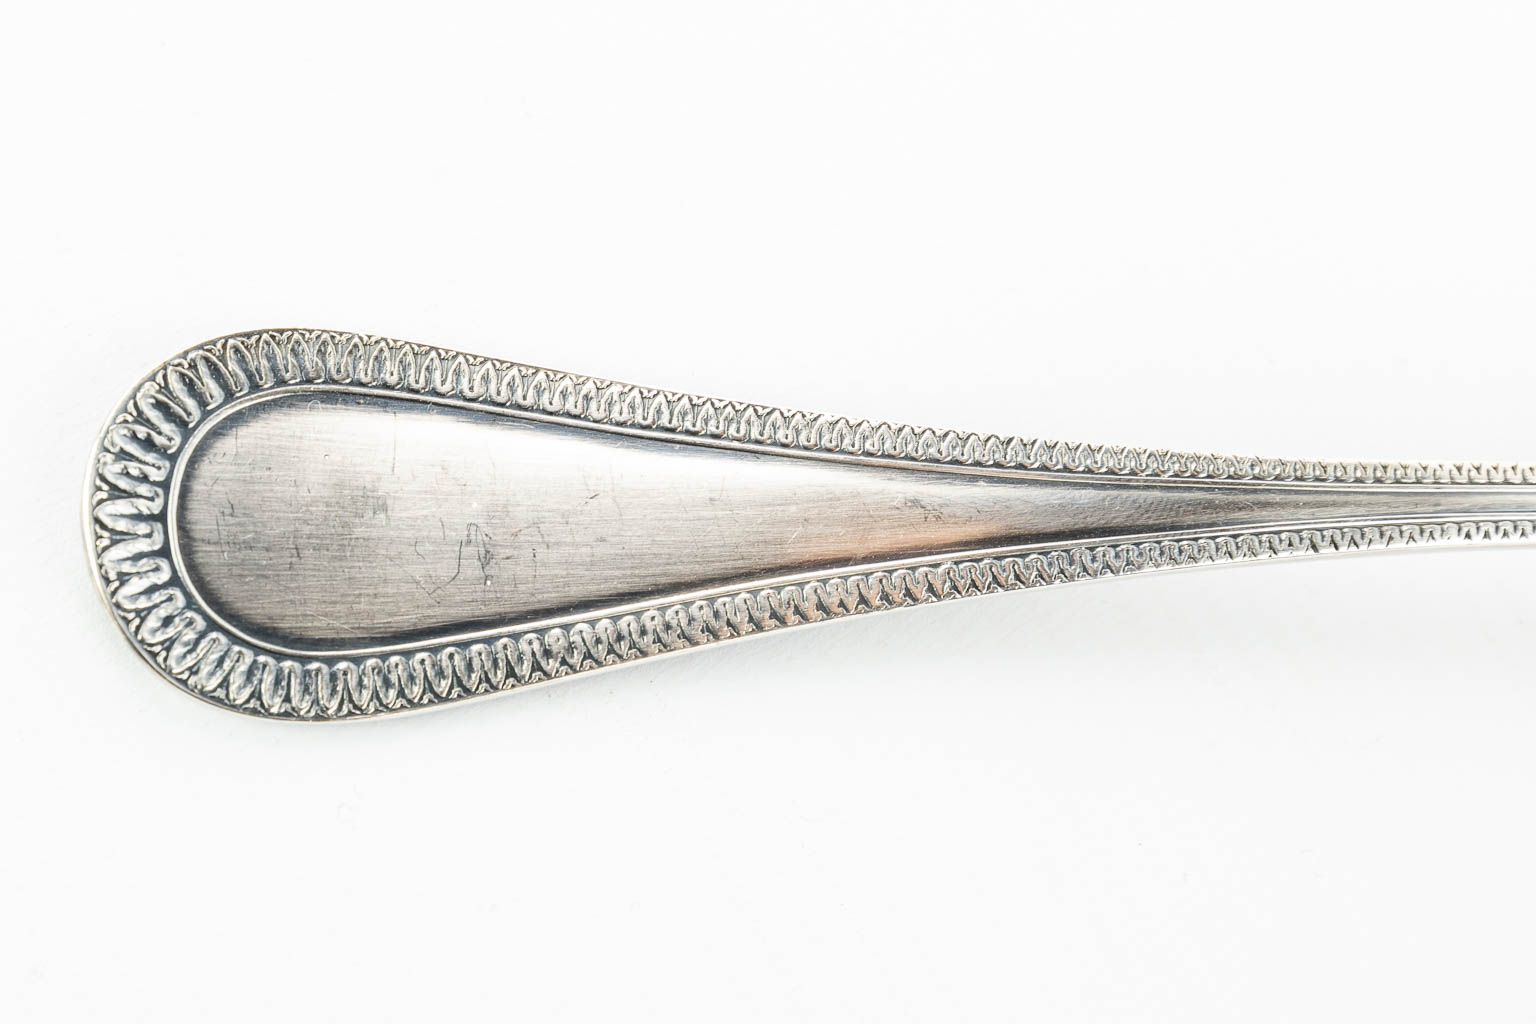 A 60-piece flatware set made by Wolfers, silver, marked A835/A925 and with blades made by Wiskemann. 